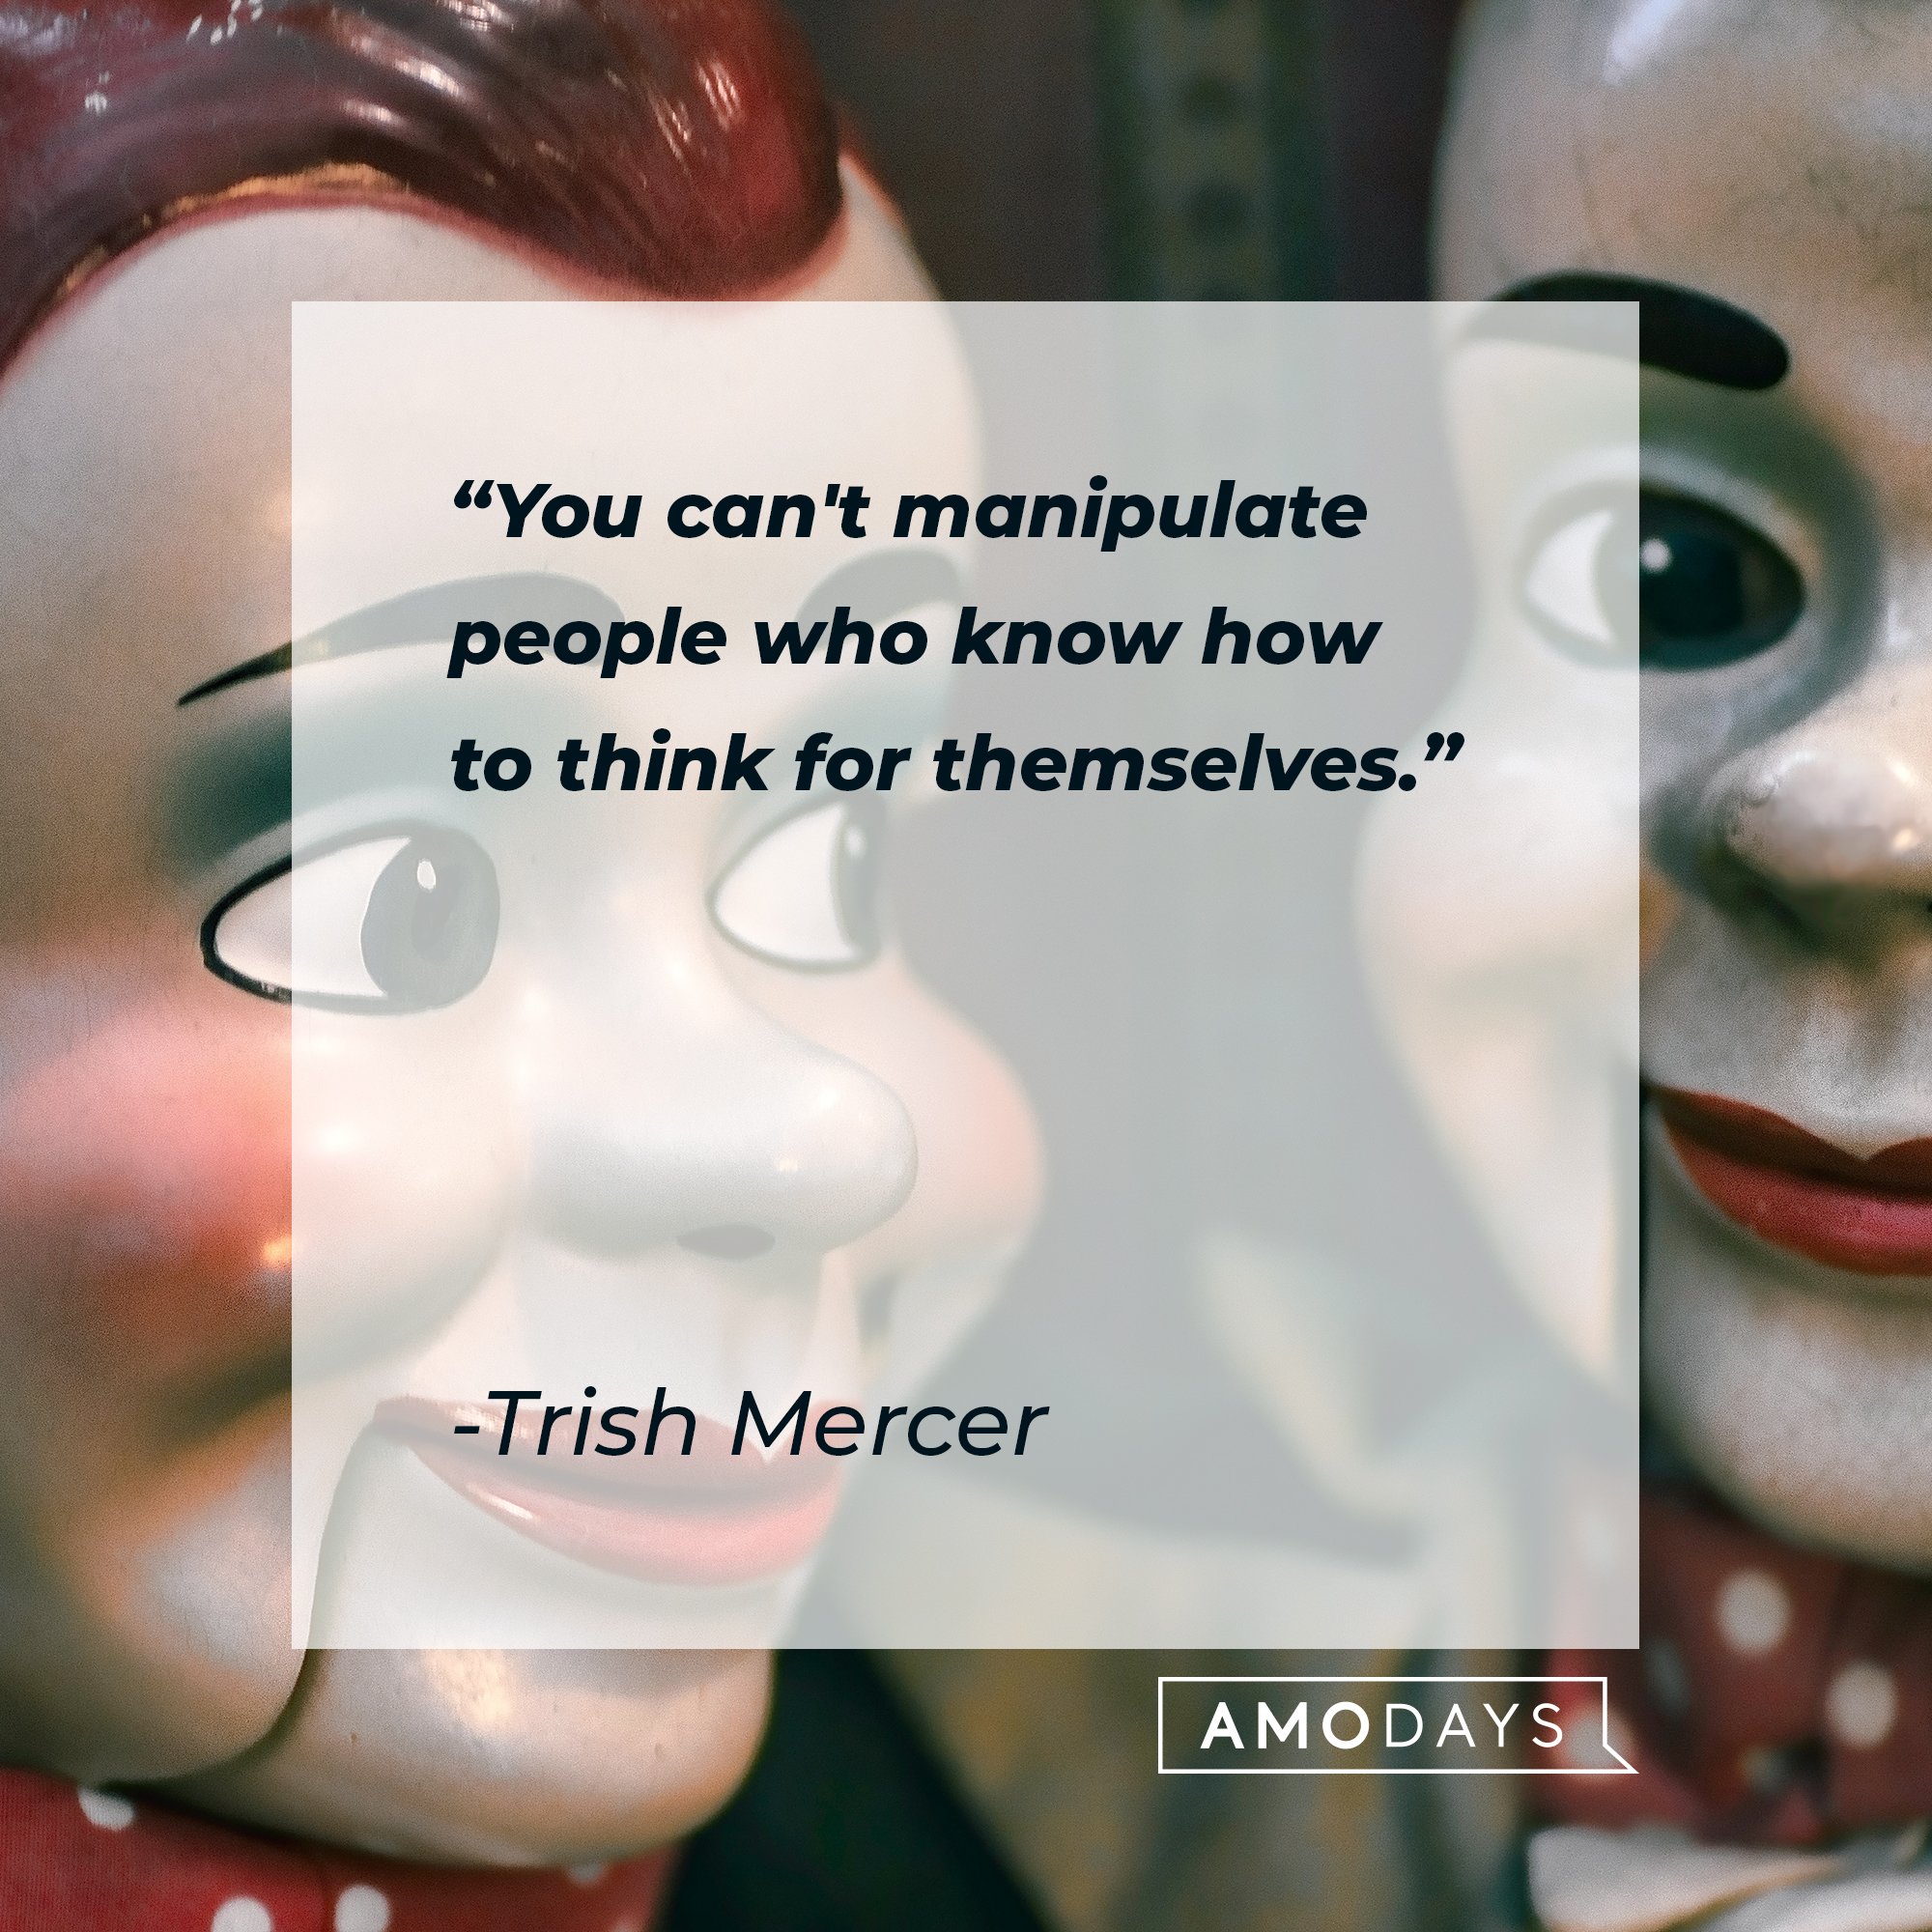 Trish Mercer's quote" "You can't manipulate people who know how to think for themselves." | Image: AmoDays